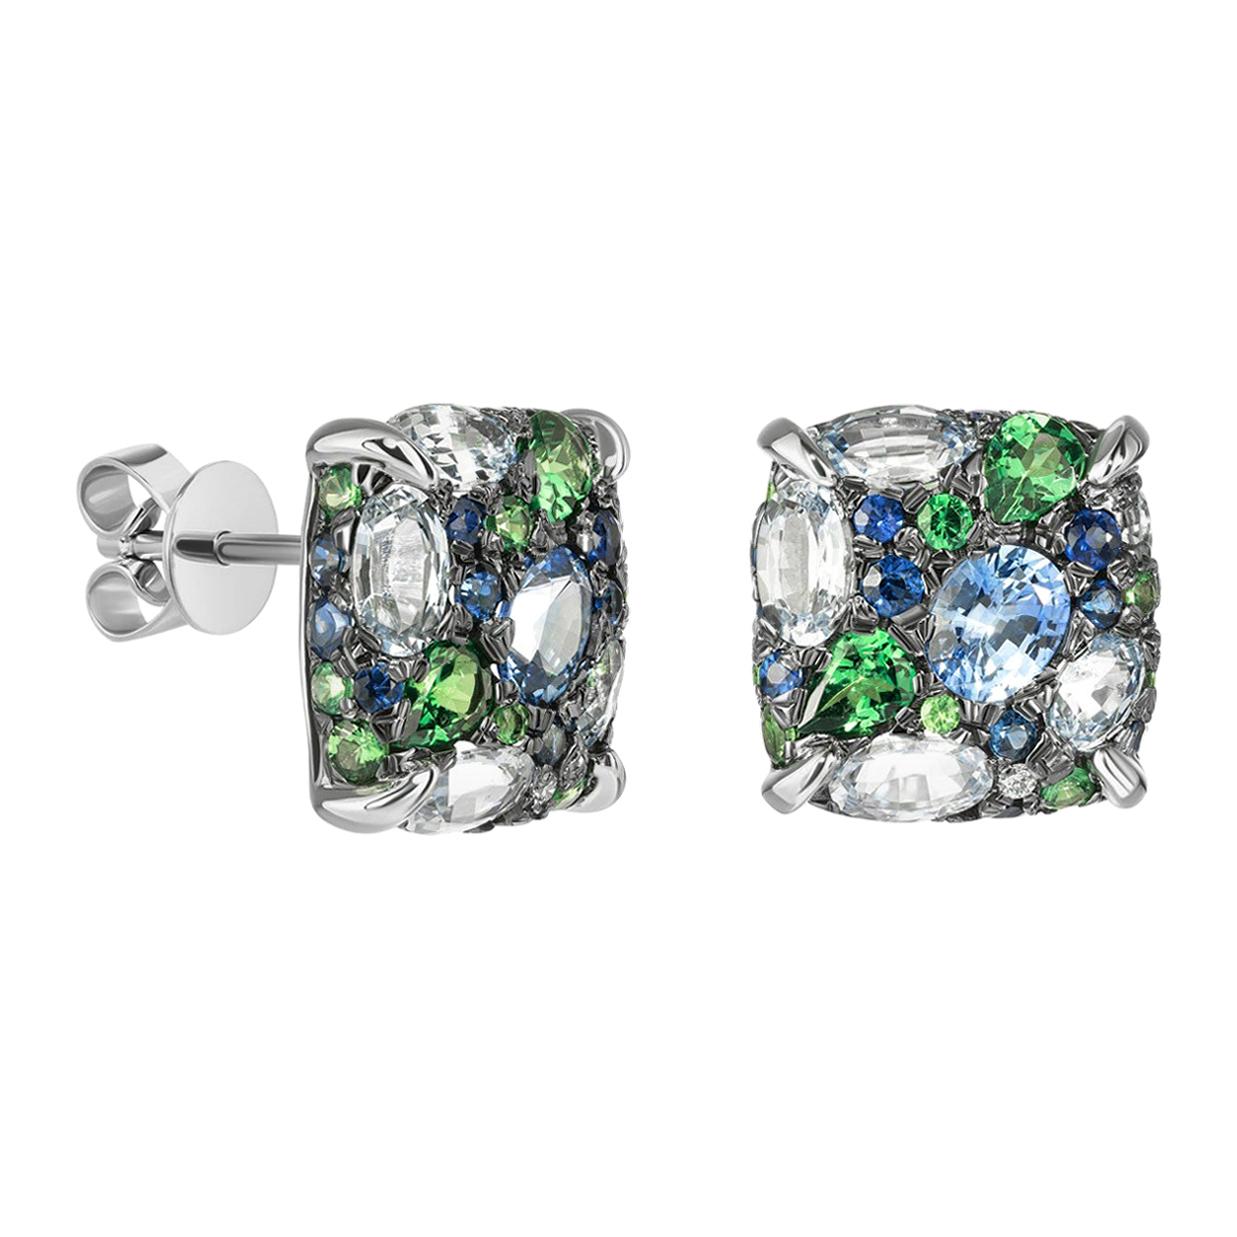 Earrings White Gold 14 K (Matching Ring Available)
Diamond 2-RND17-0,02-4/6A
Blue Sapphire 26-RND-0,11ct
Blue Sapphire 2-Oval-0,74ct
Blue Sapphire 8-Oval-2,95ct
Blue Sapphire 2-RND-0,16ct
Tsavorite 22-Oval-1,02ct

Weight 6.23 grams


With a heritage